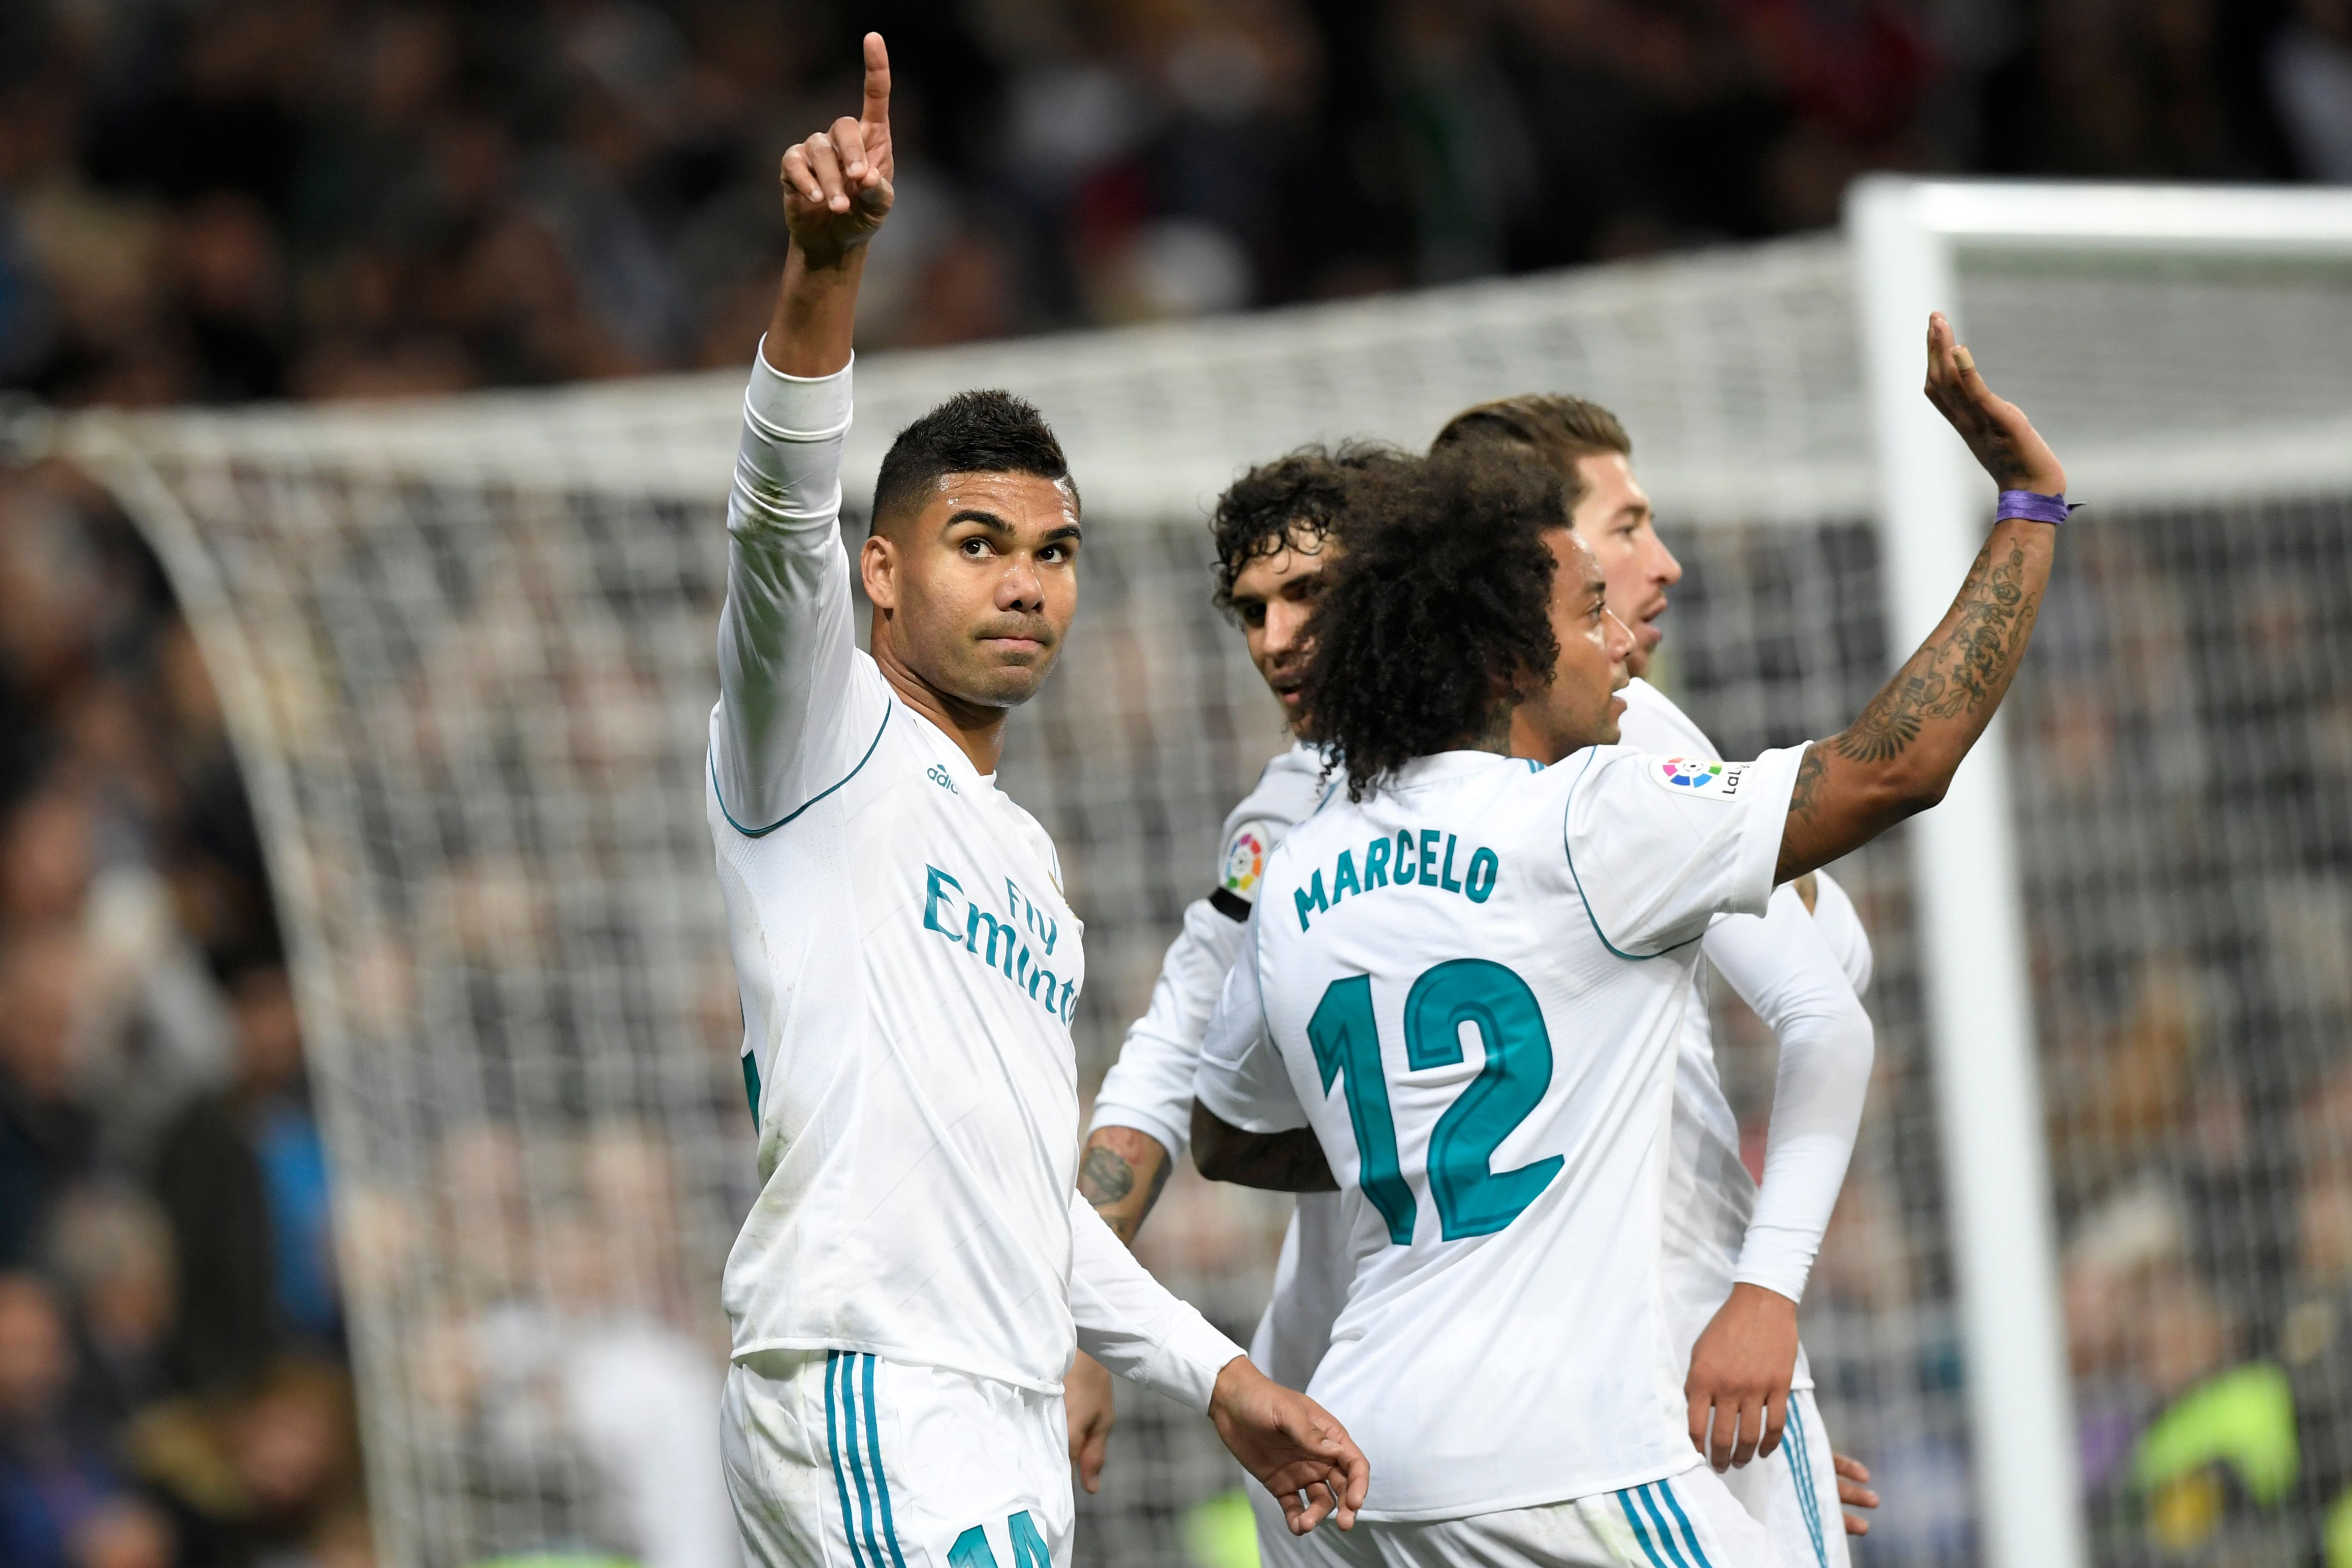 Real Madrid's Brazilian midfielder Casemiro (L) celebrates with teammates after scoring a goal during the Spanish league football match Real Madrid CF vs UD Las Palmas at the Santiago Bernabeu stadium in Madrid on November 5, 2017. / AFP PHOTO / GABRIEL BOUYS        (Photo credit should read GABRIEL BOUYS/AFP/Getty Images)